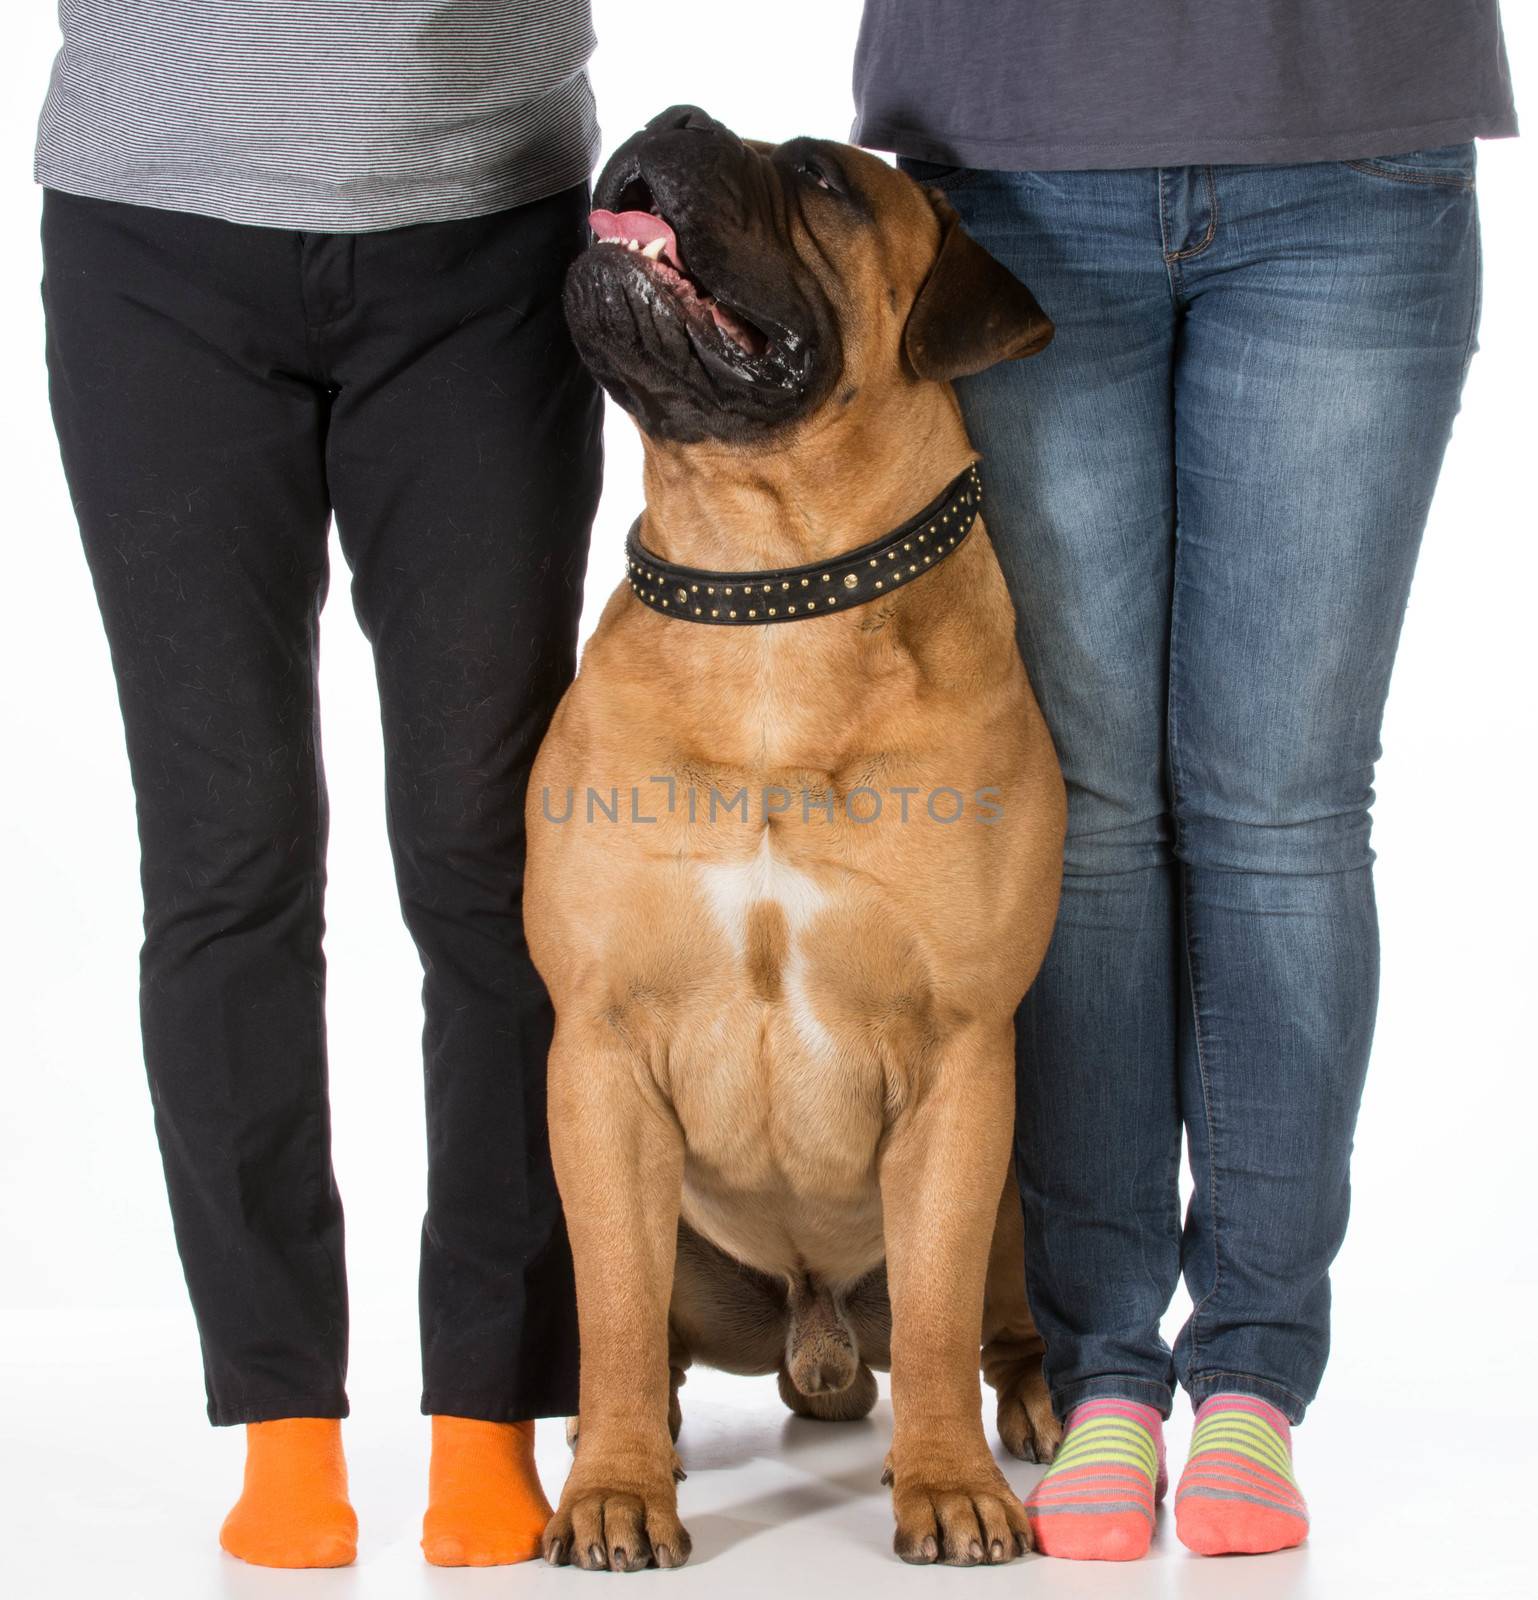 bullmastiff and his owners by willeecole123